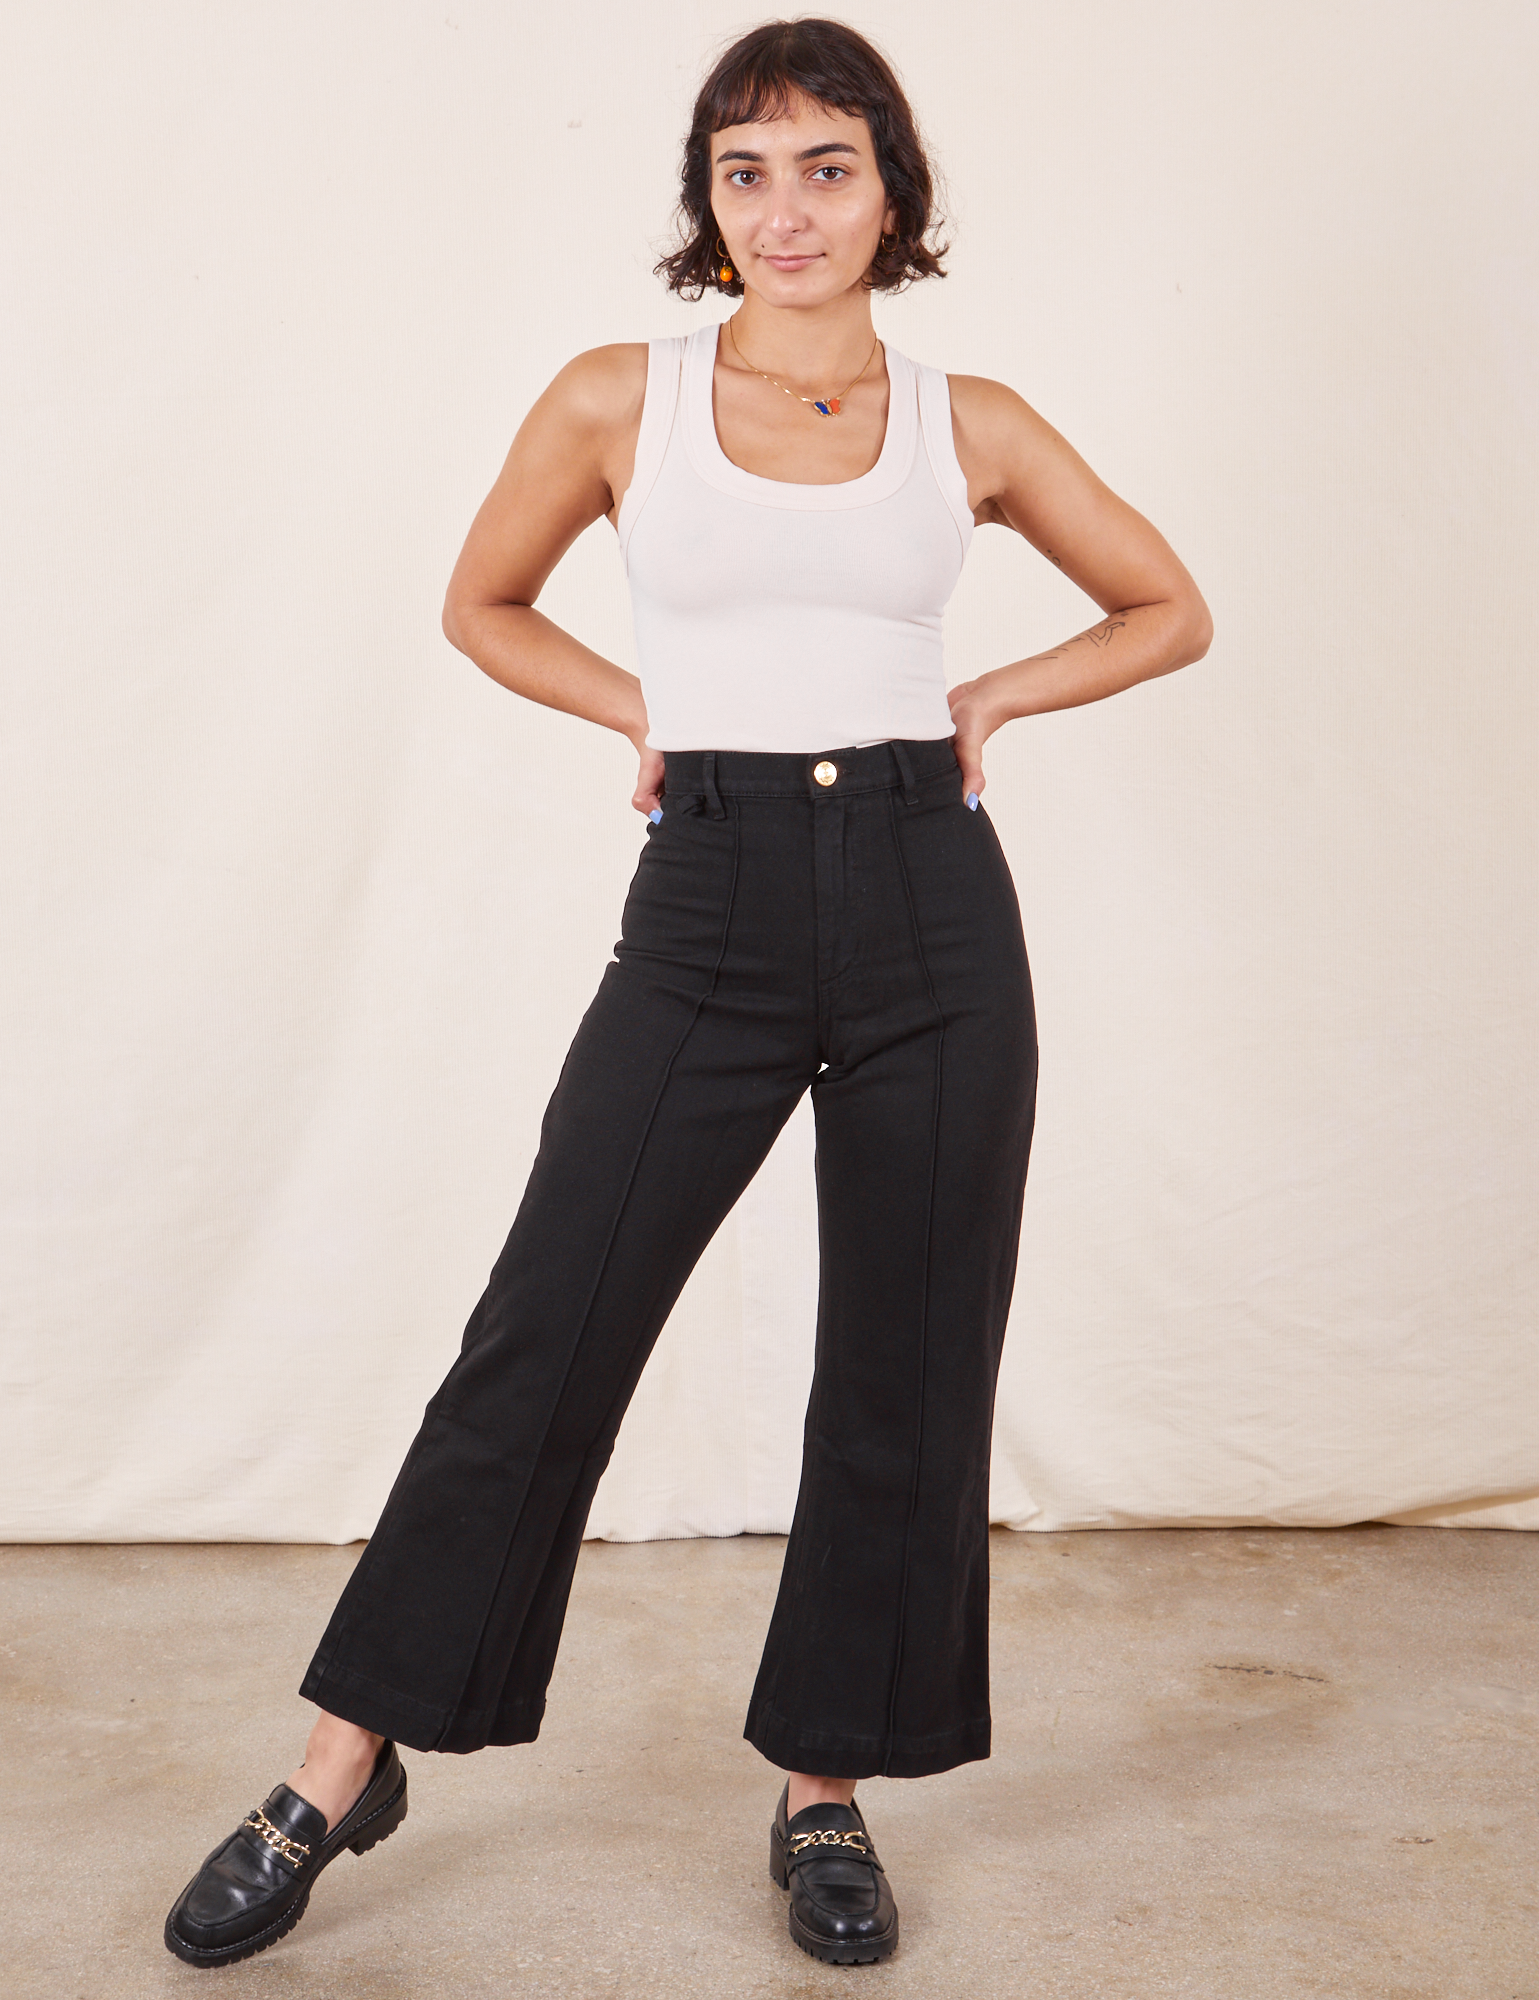 Soraya is 5&#39;2&quot; and wearing XXS Petite Western Pants in Basic Black paired with a vintage off-white Tank Top